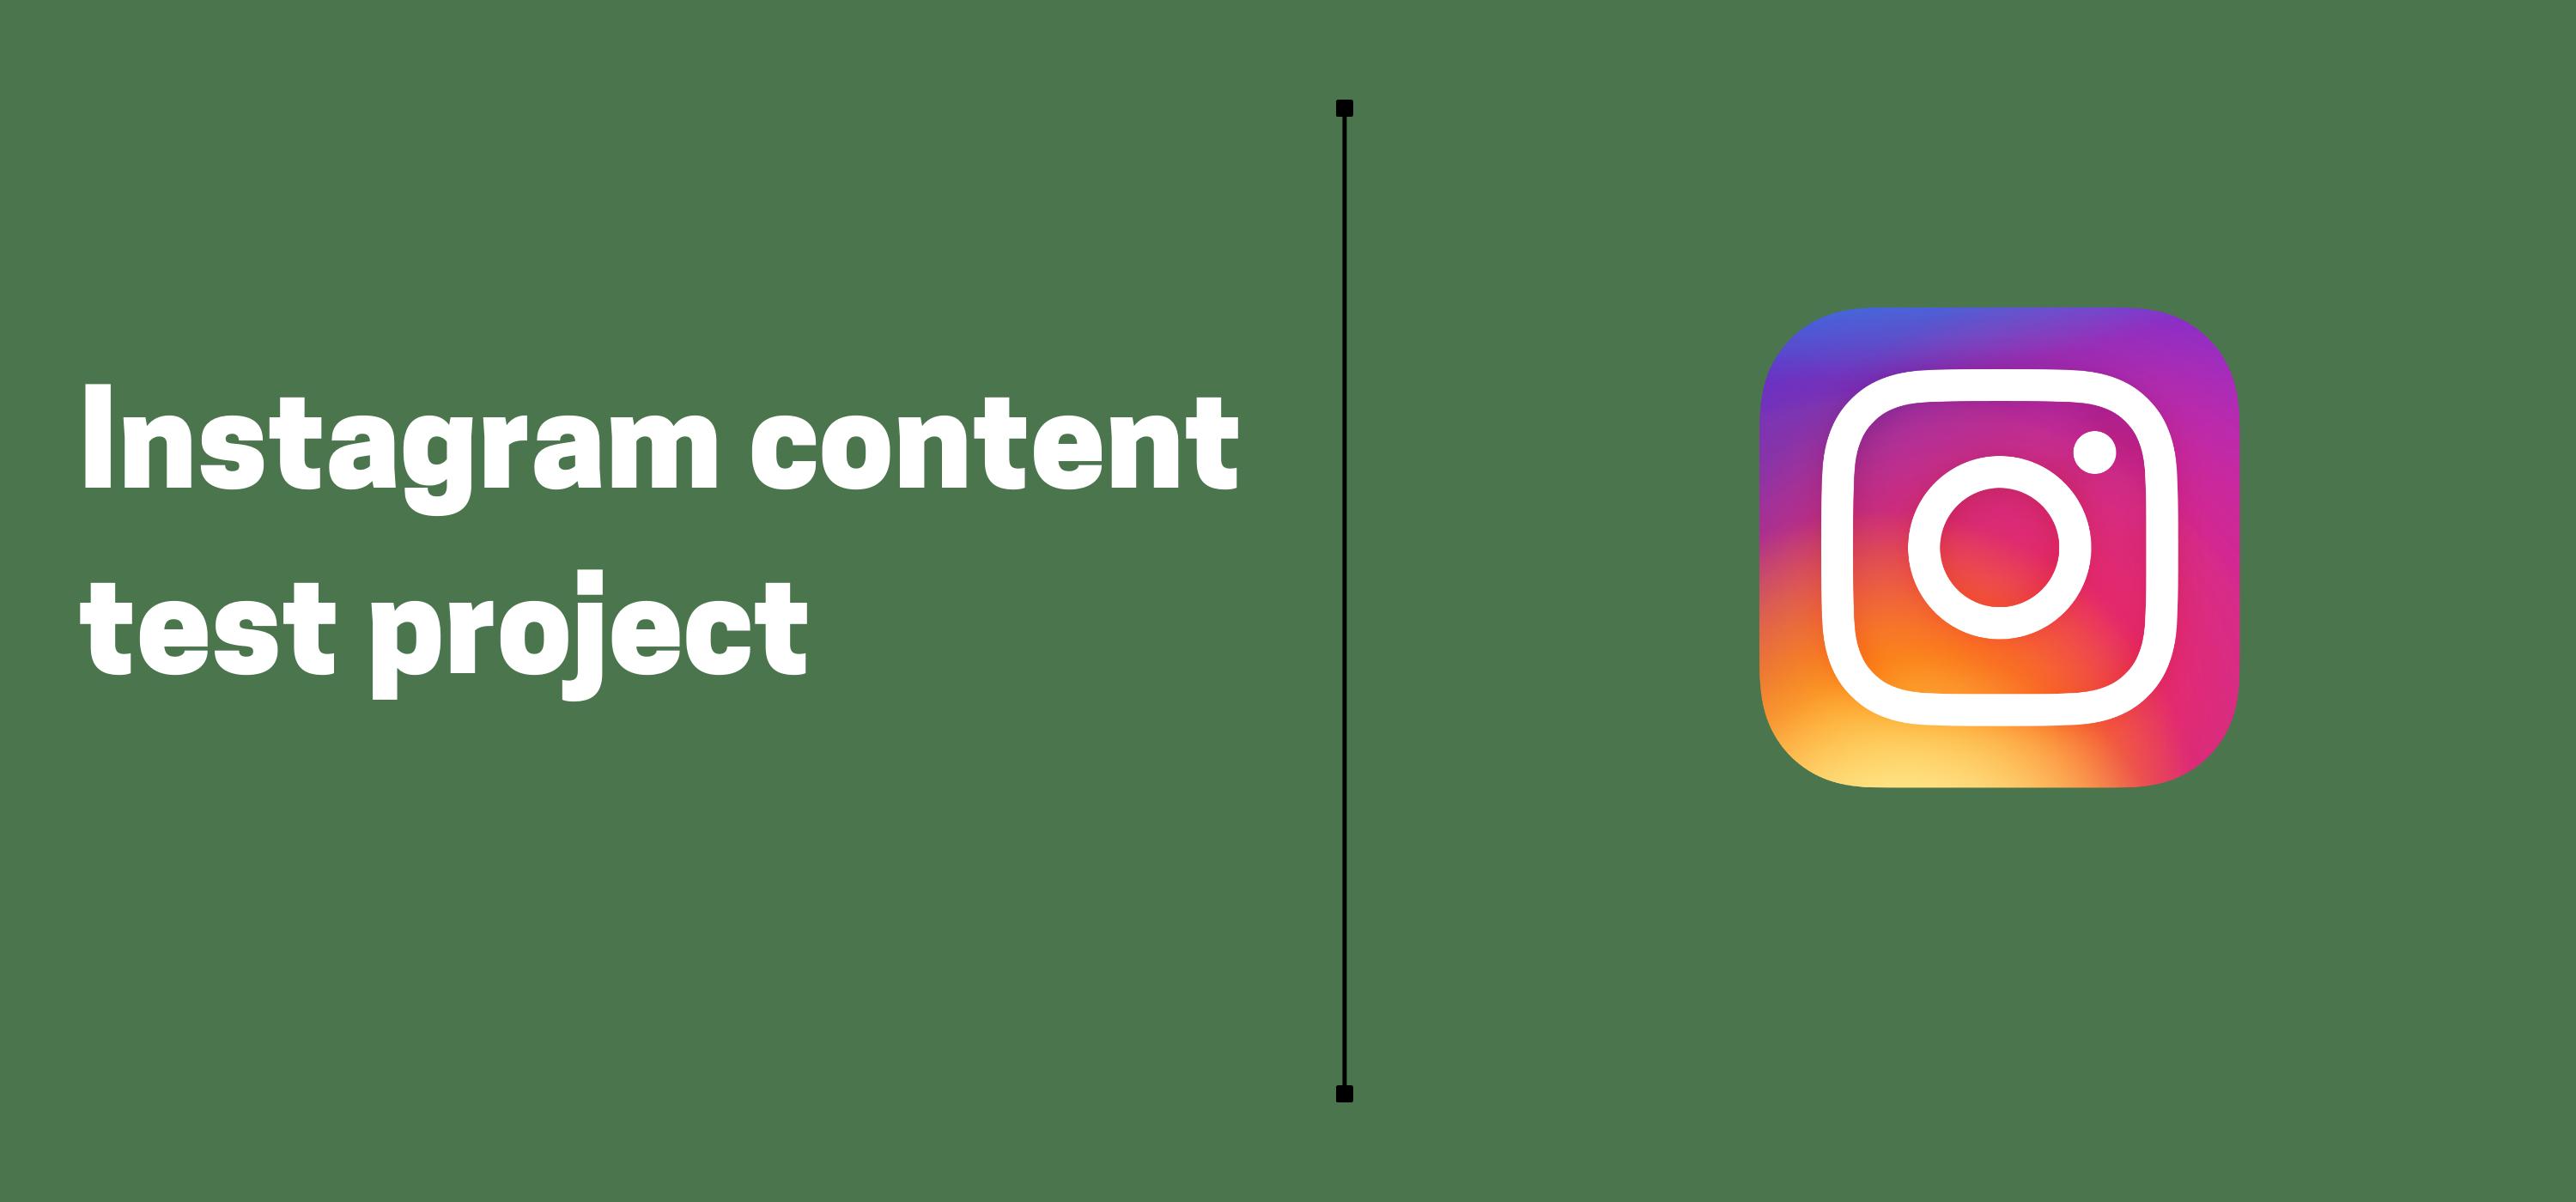 Instagram content suggestions and critique for BUMI